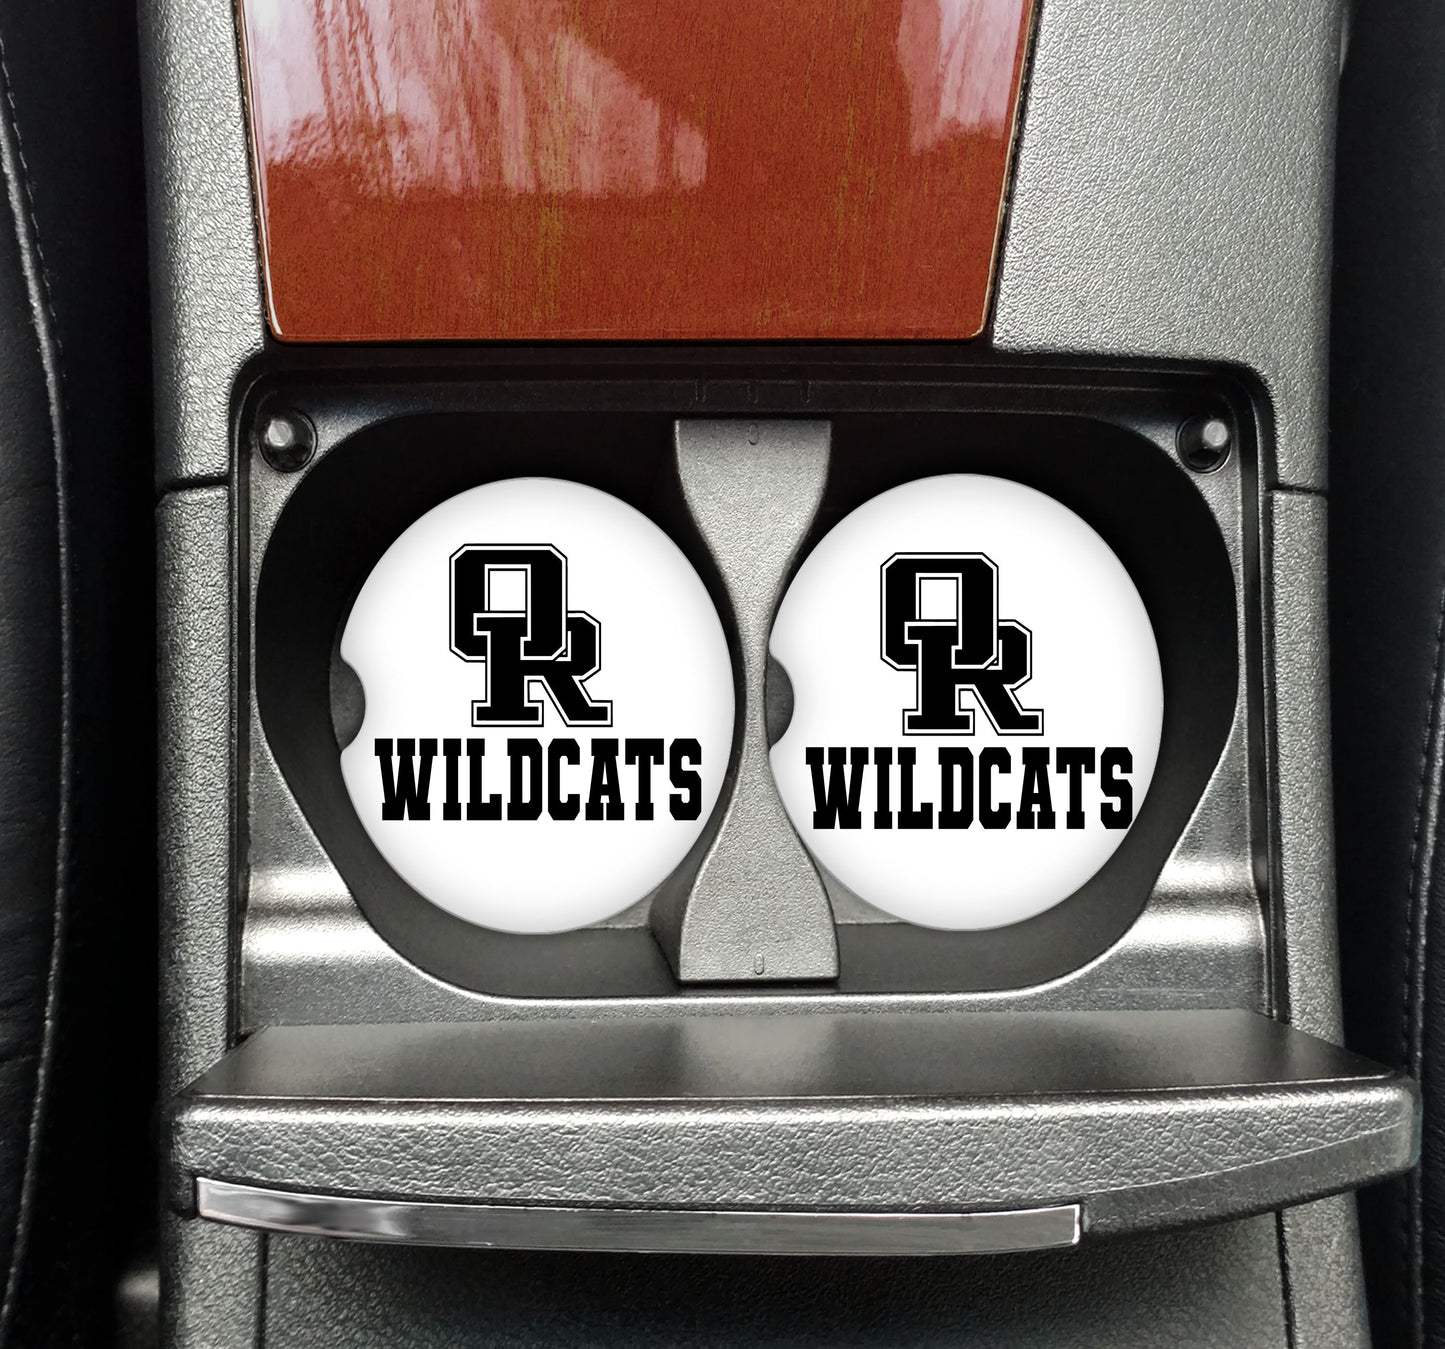 OR Wildcats Sandstone Car Coaster. Fits Most Car Cup Holders. - Bair Prints